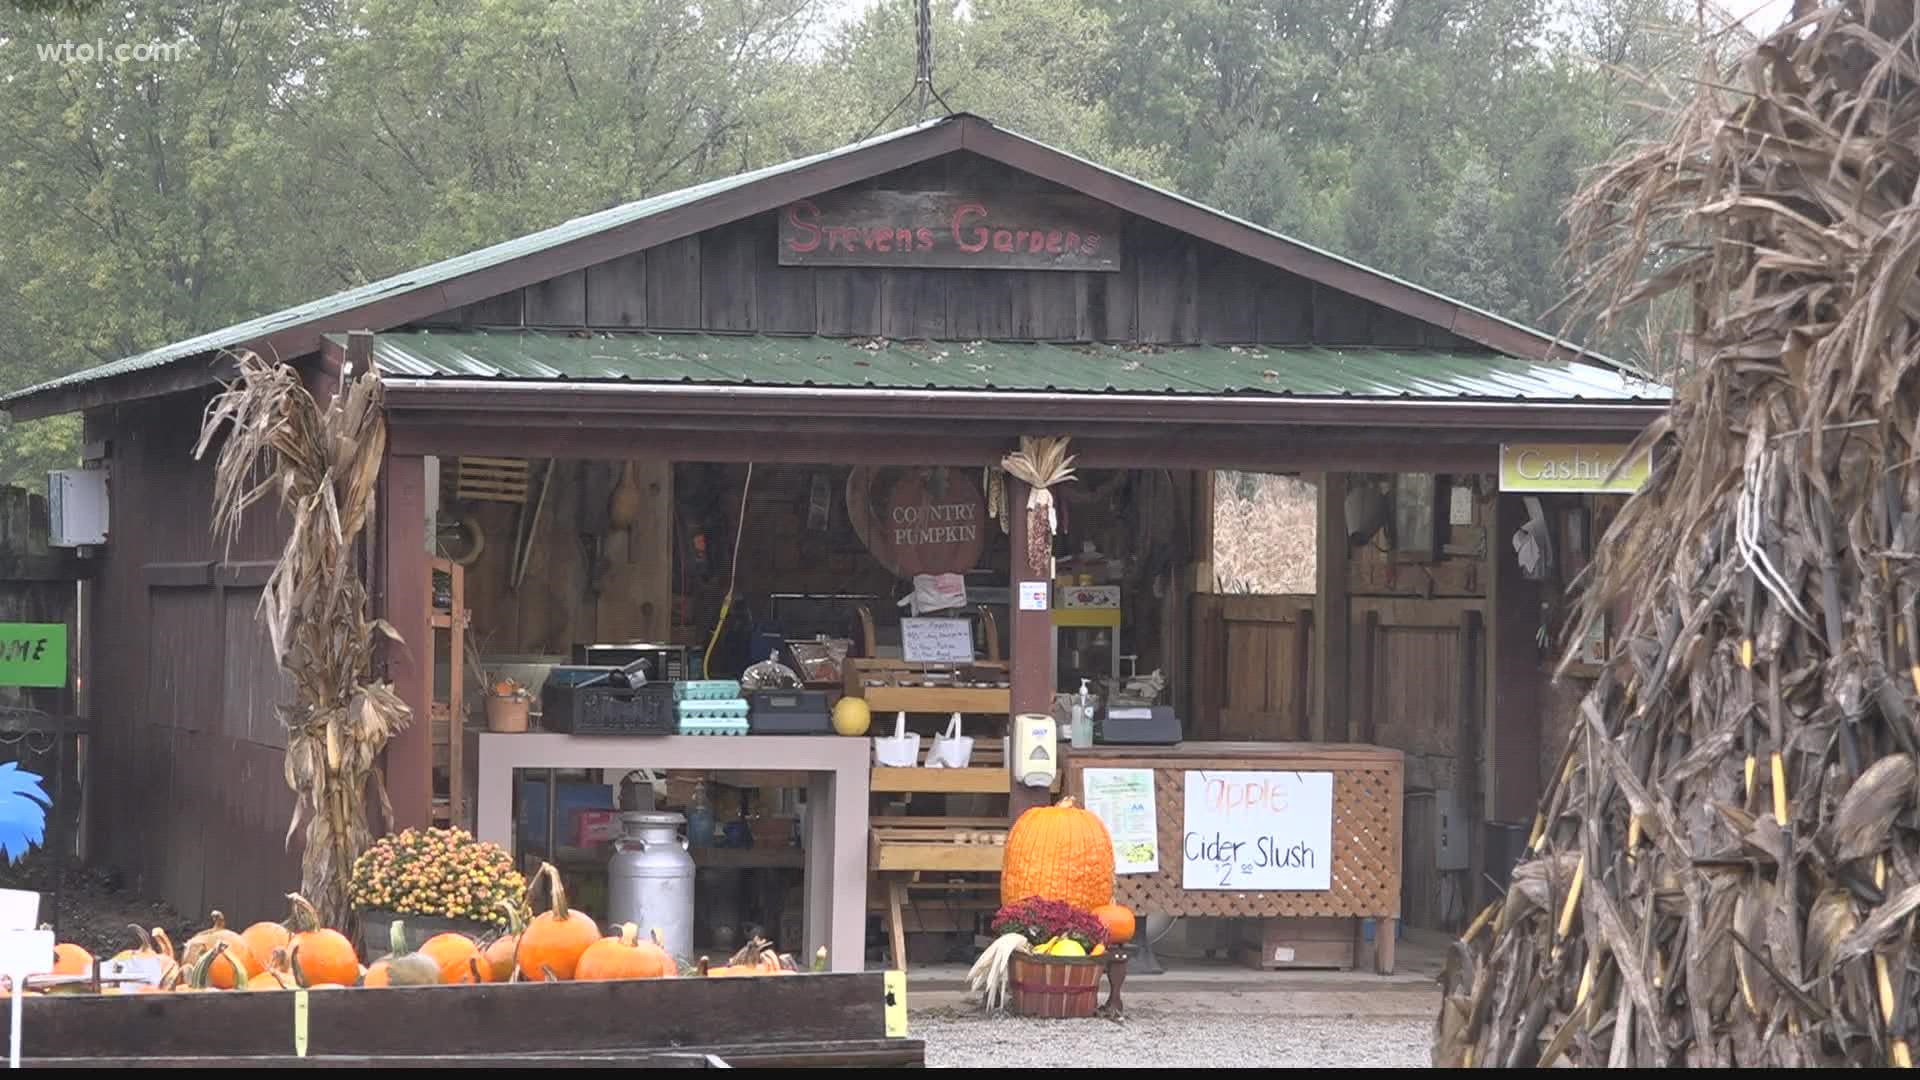 Nationwide, a shortage of pumpkins and Christmas trees is being reported, with less than ideal weather to blame. But local family farms say their harvests were fine.